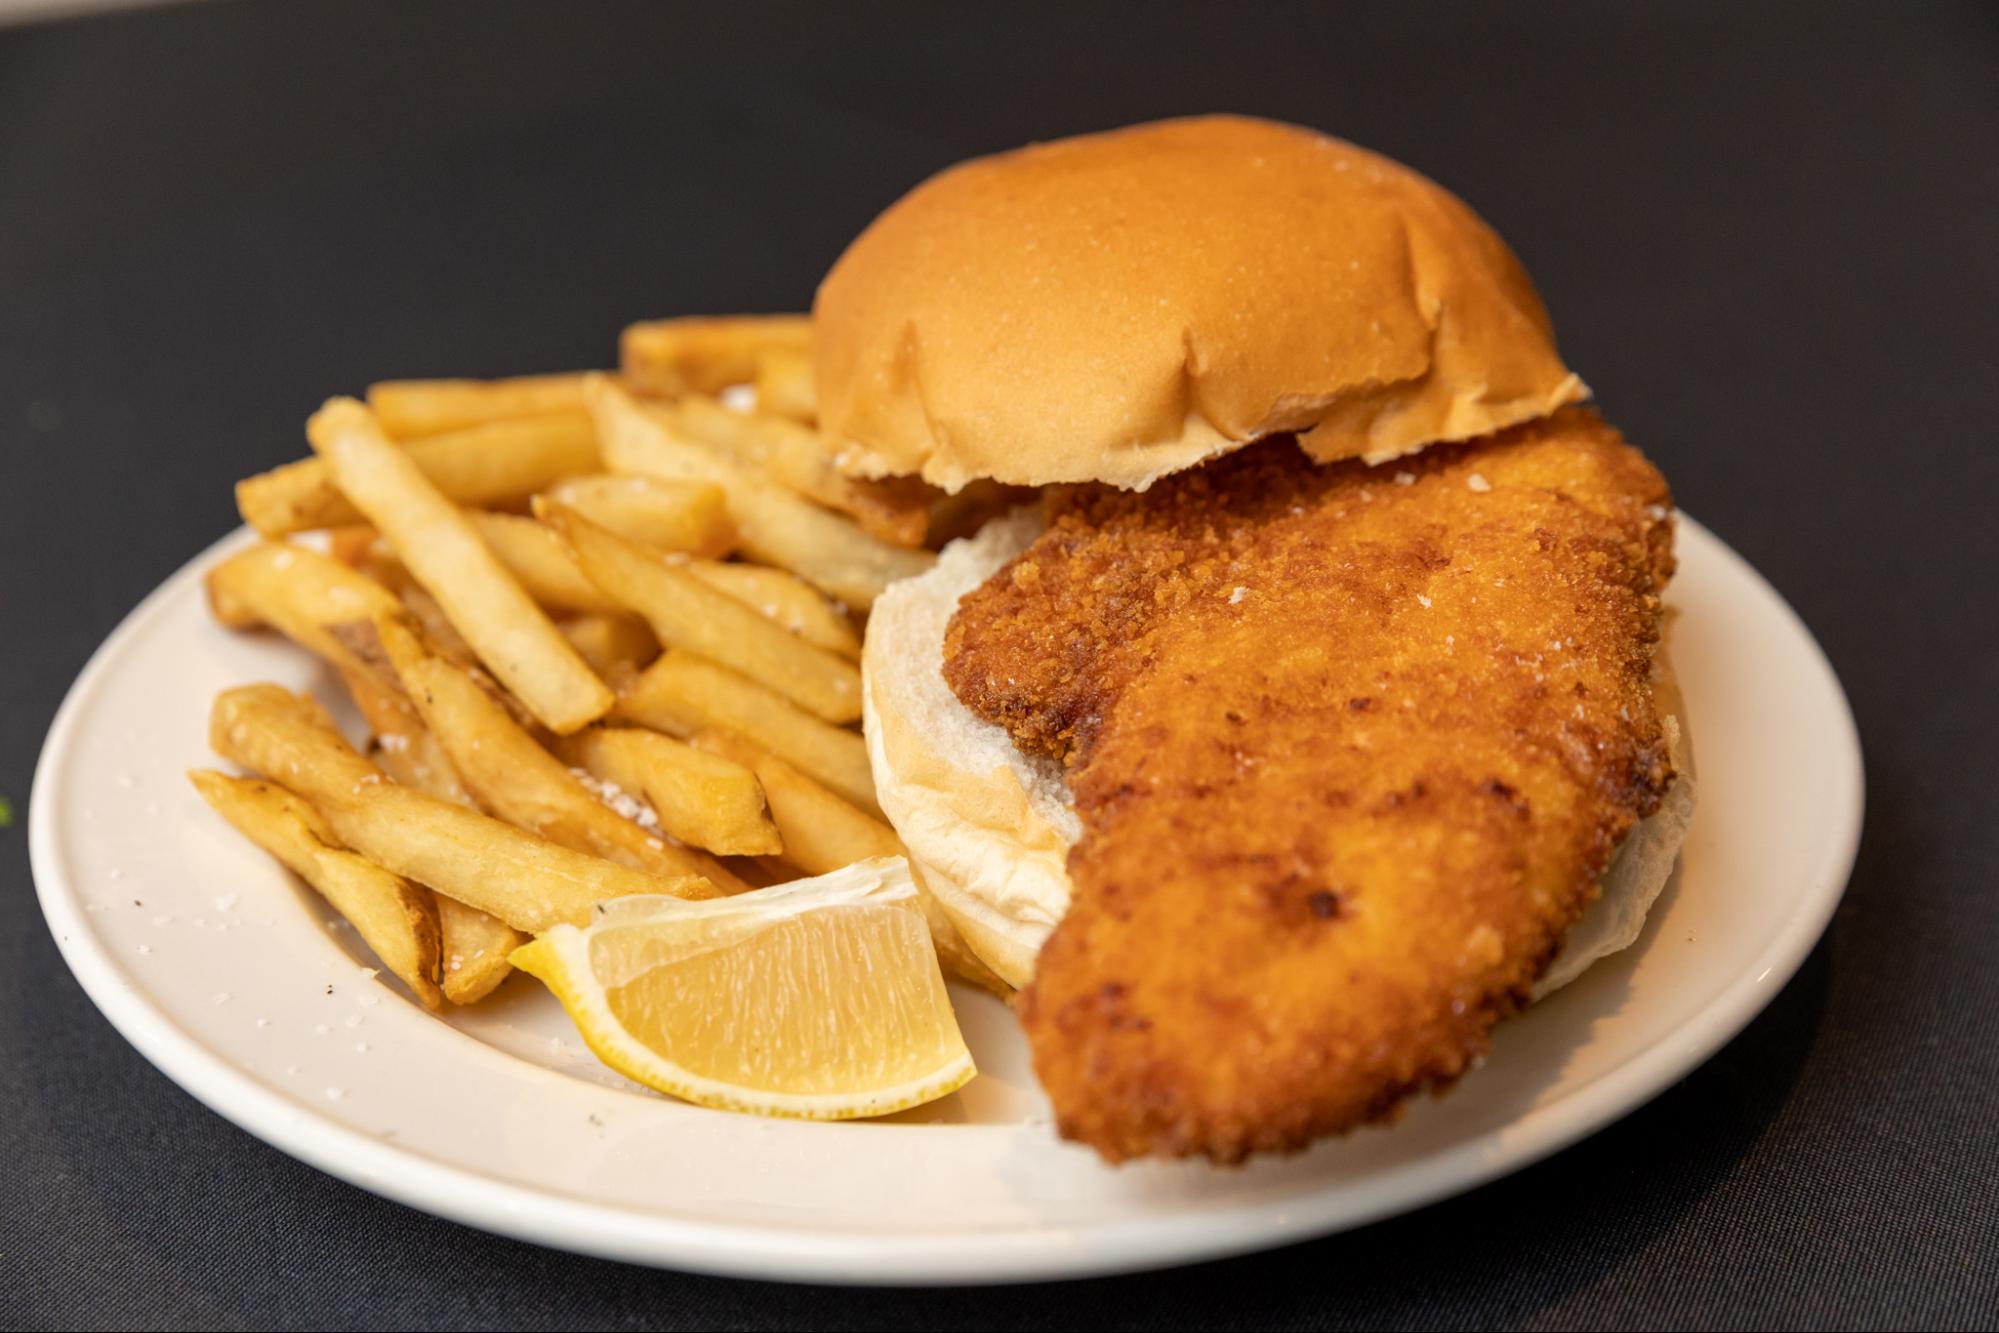 A photo of a fish sandwich from Remo's Catering with fries and a lemon on the side.